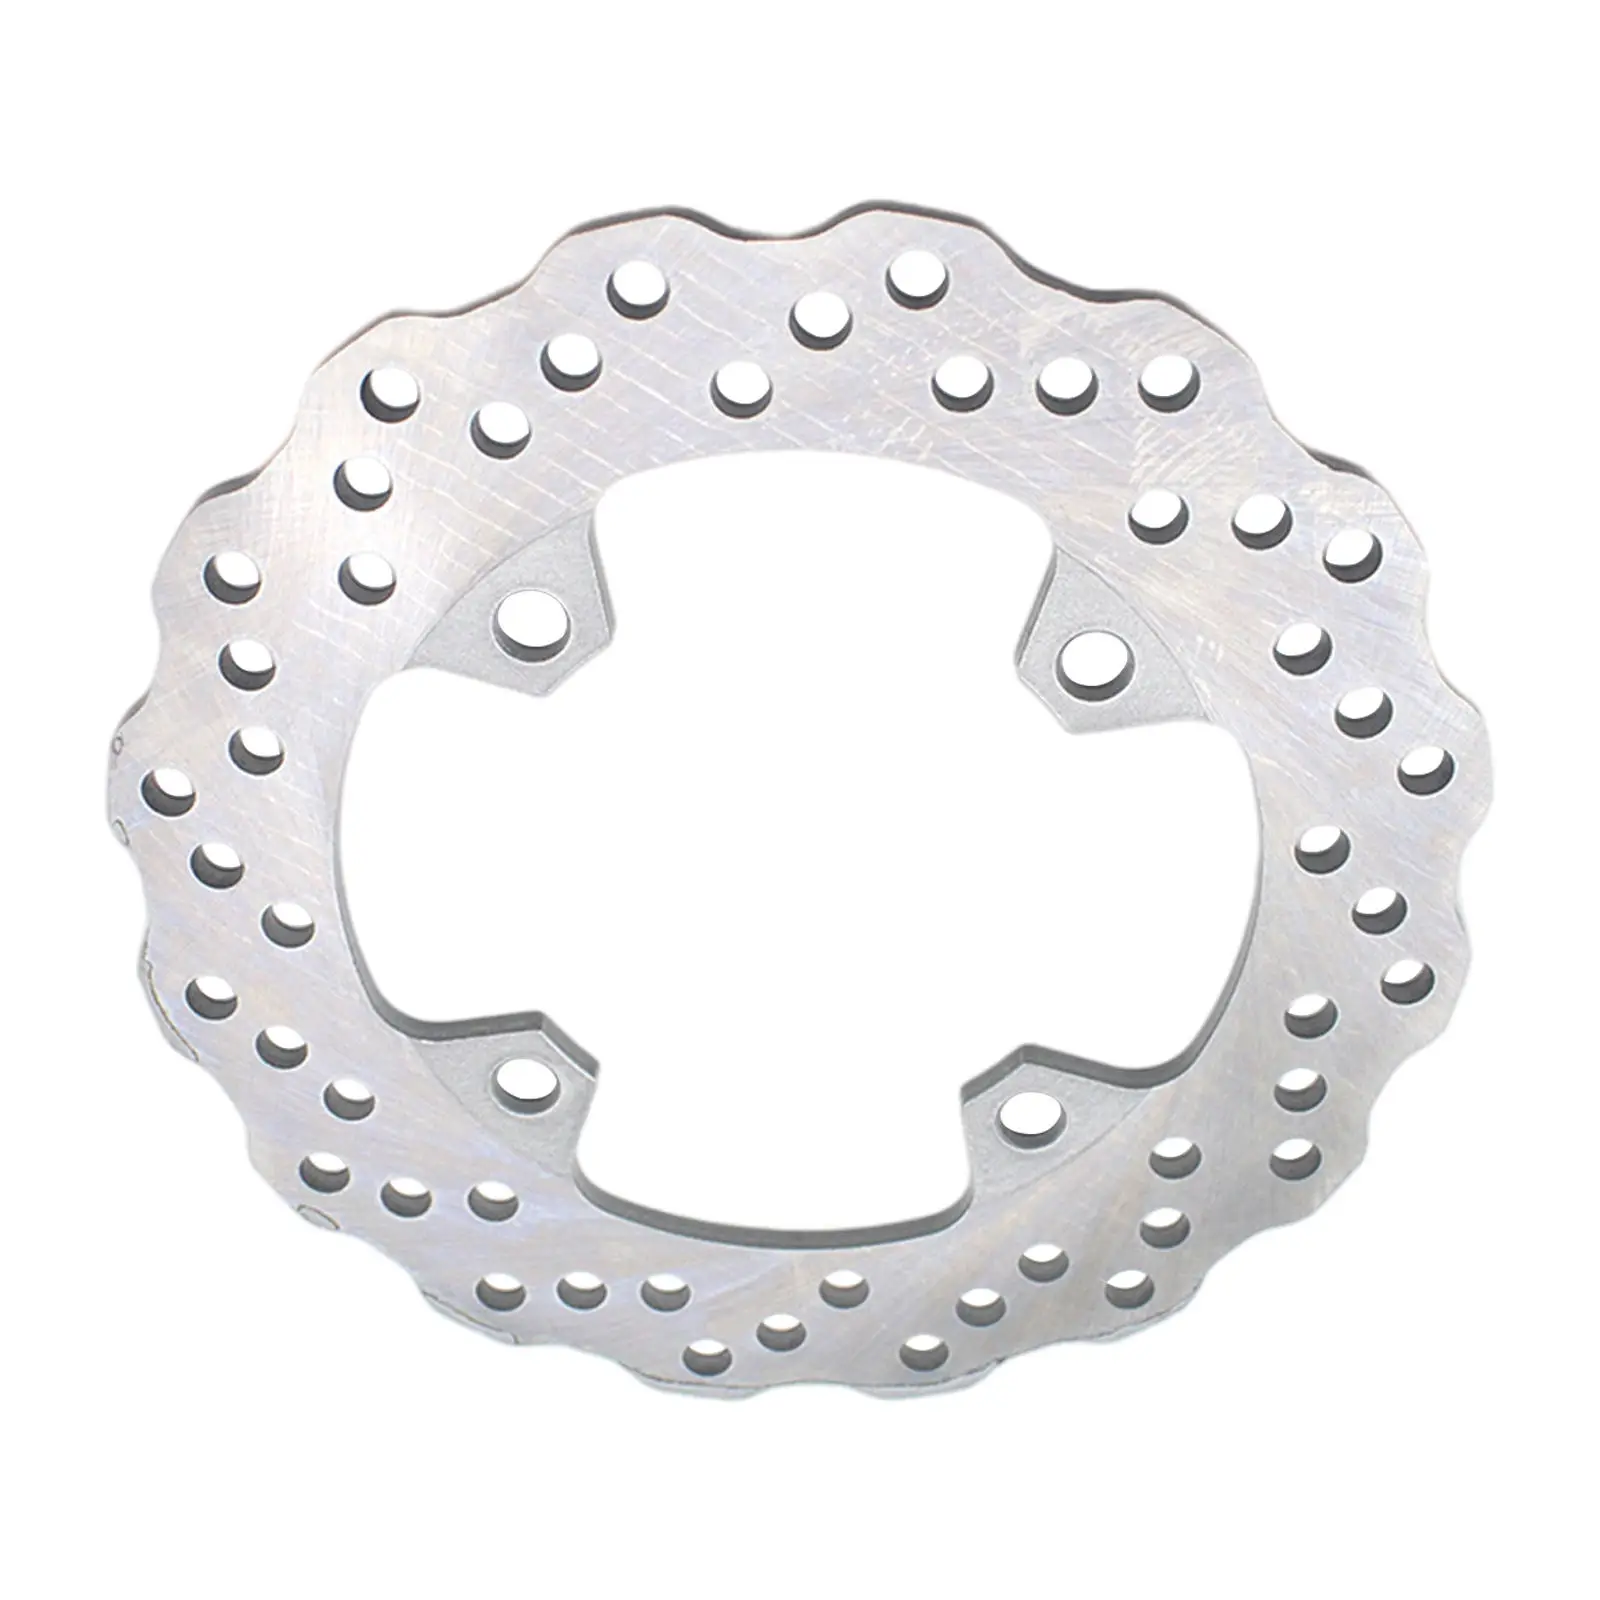 Rear Brake Disc Rotor, Motorcycle Replacement, Accessories 220mm Silver Steel for Kawasaki Z1000 ER-6F ZX-10R ZX10 650 Cc ZX-6R